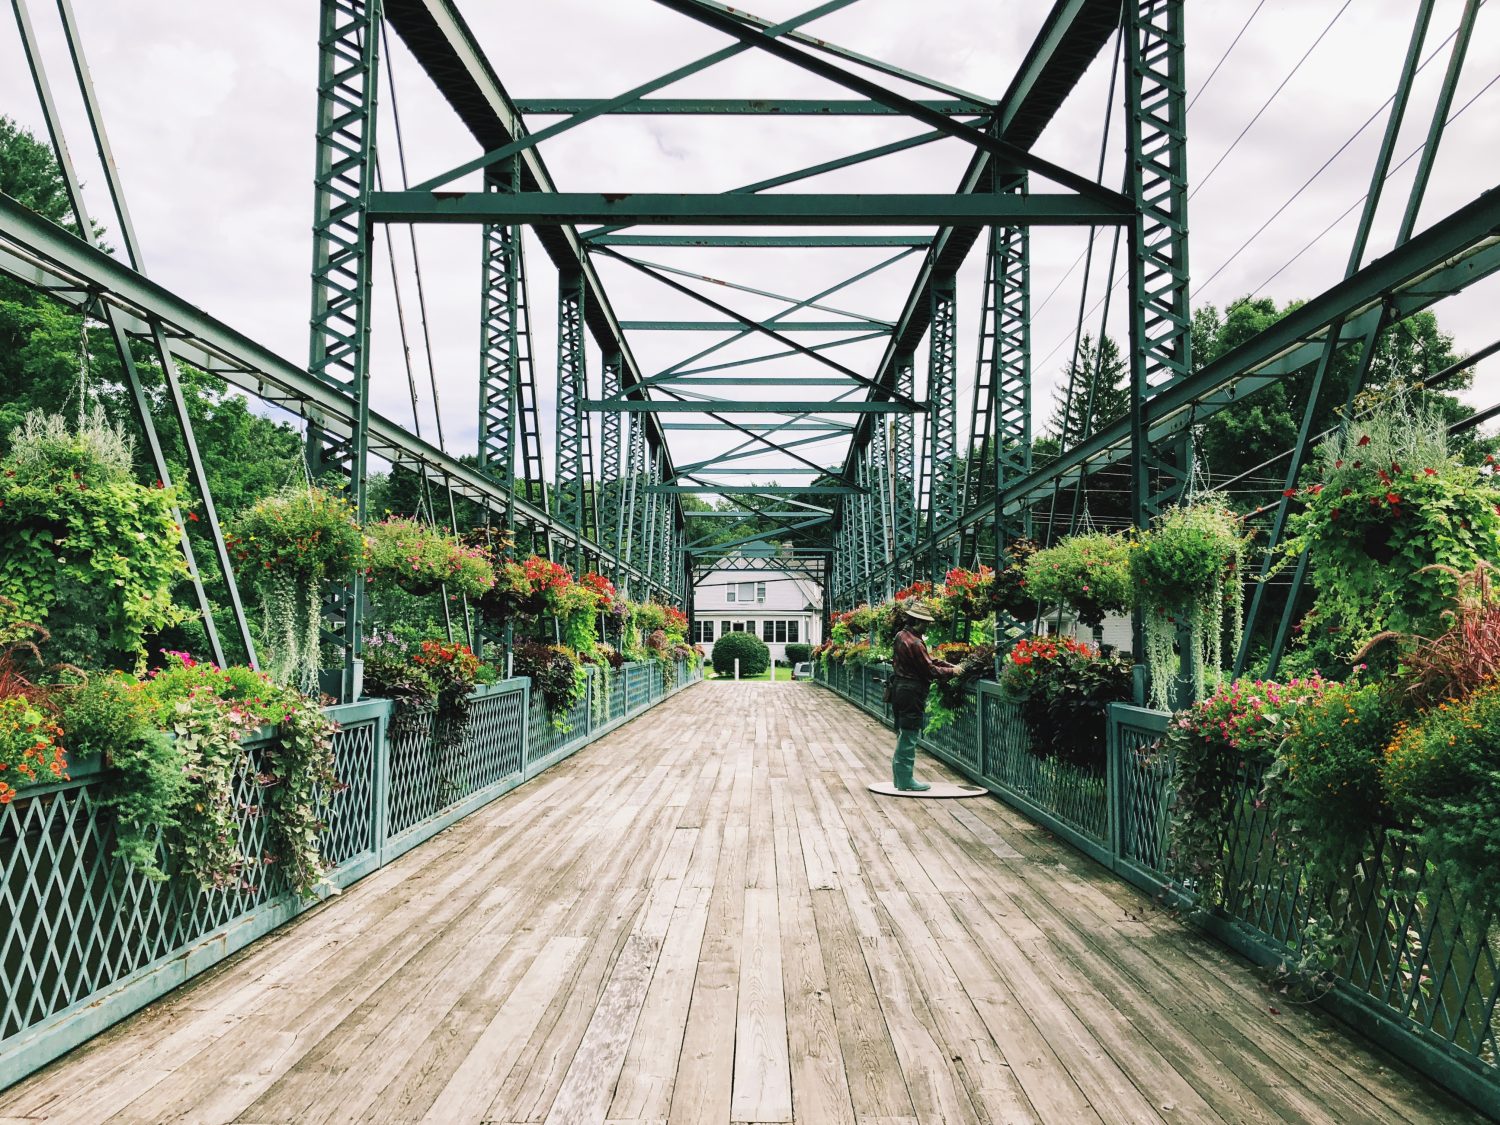 Old Drake Hill Flower Bridge is a bridge in Simsbury, Connecticut,United States. Originally carrying Drake Hill Road over the Farmington River. It is one of three surviving Parker truss bridges.